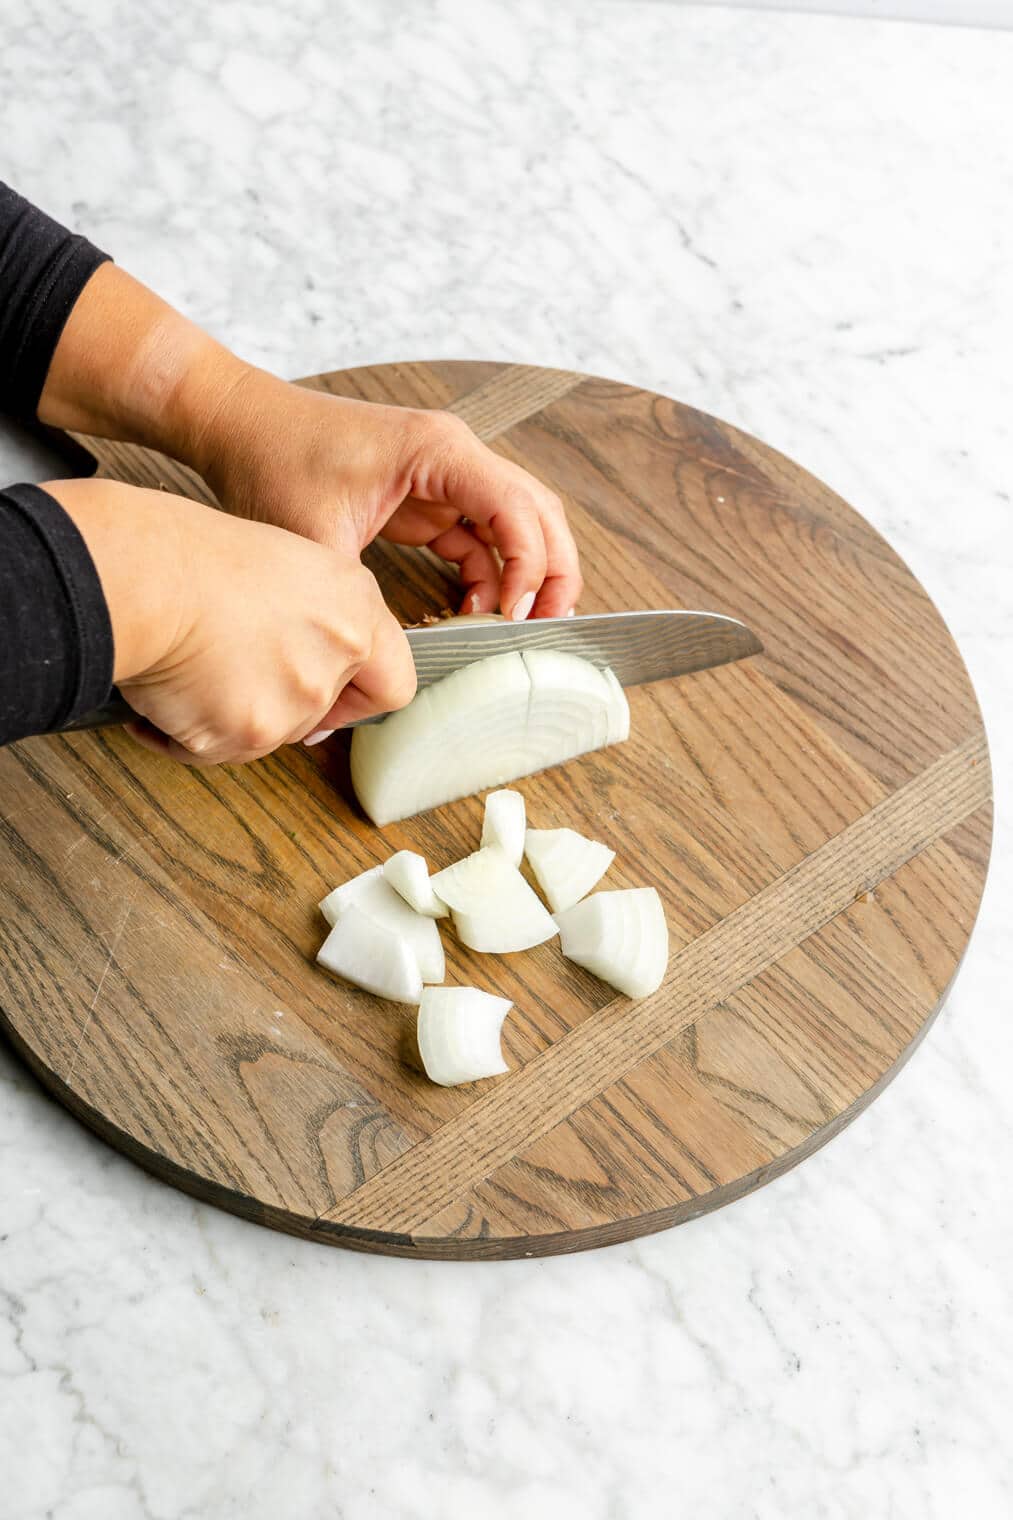 Hand slicing white onion into pieces.